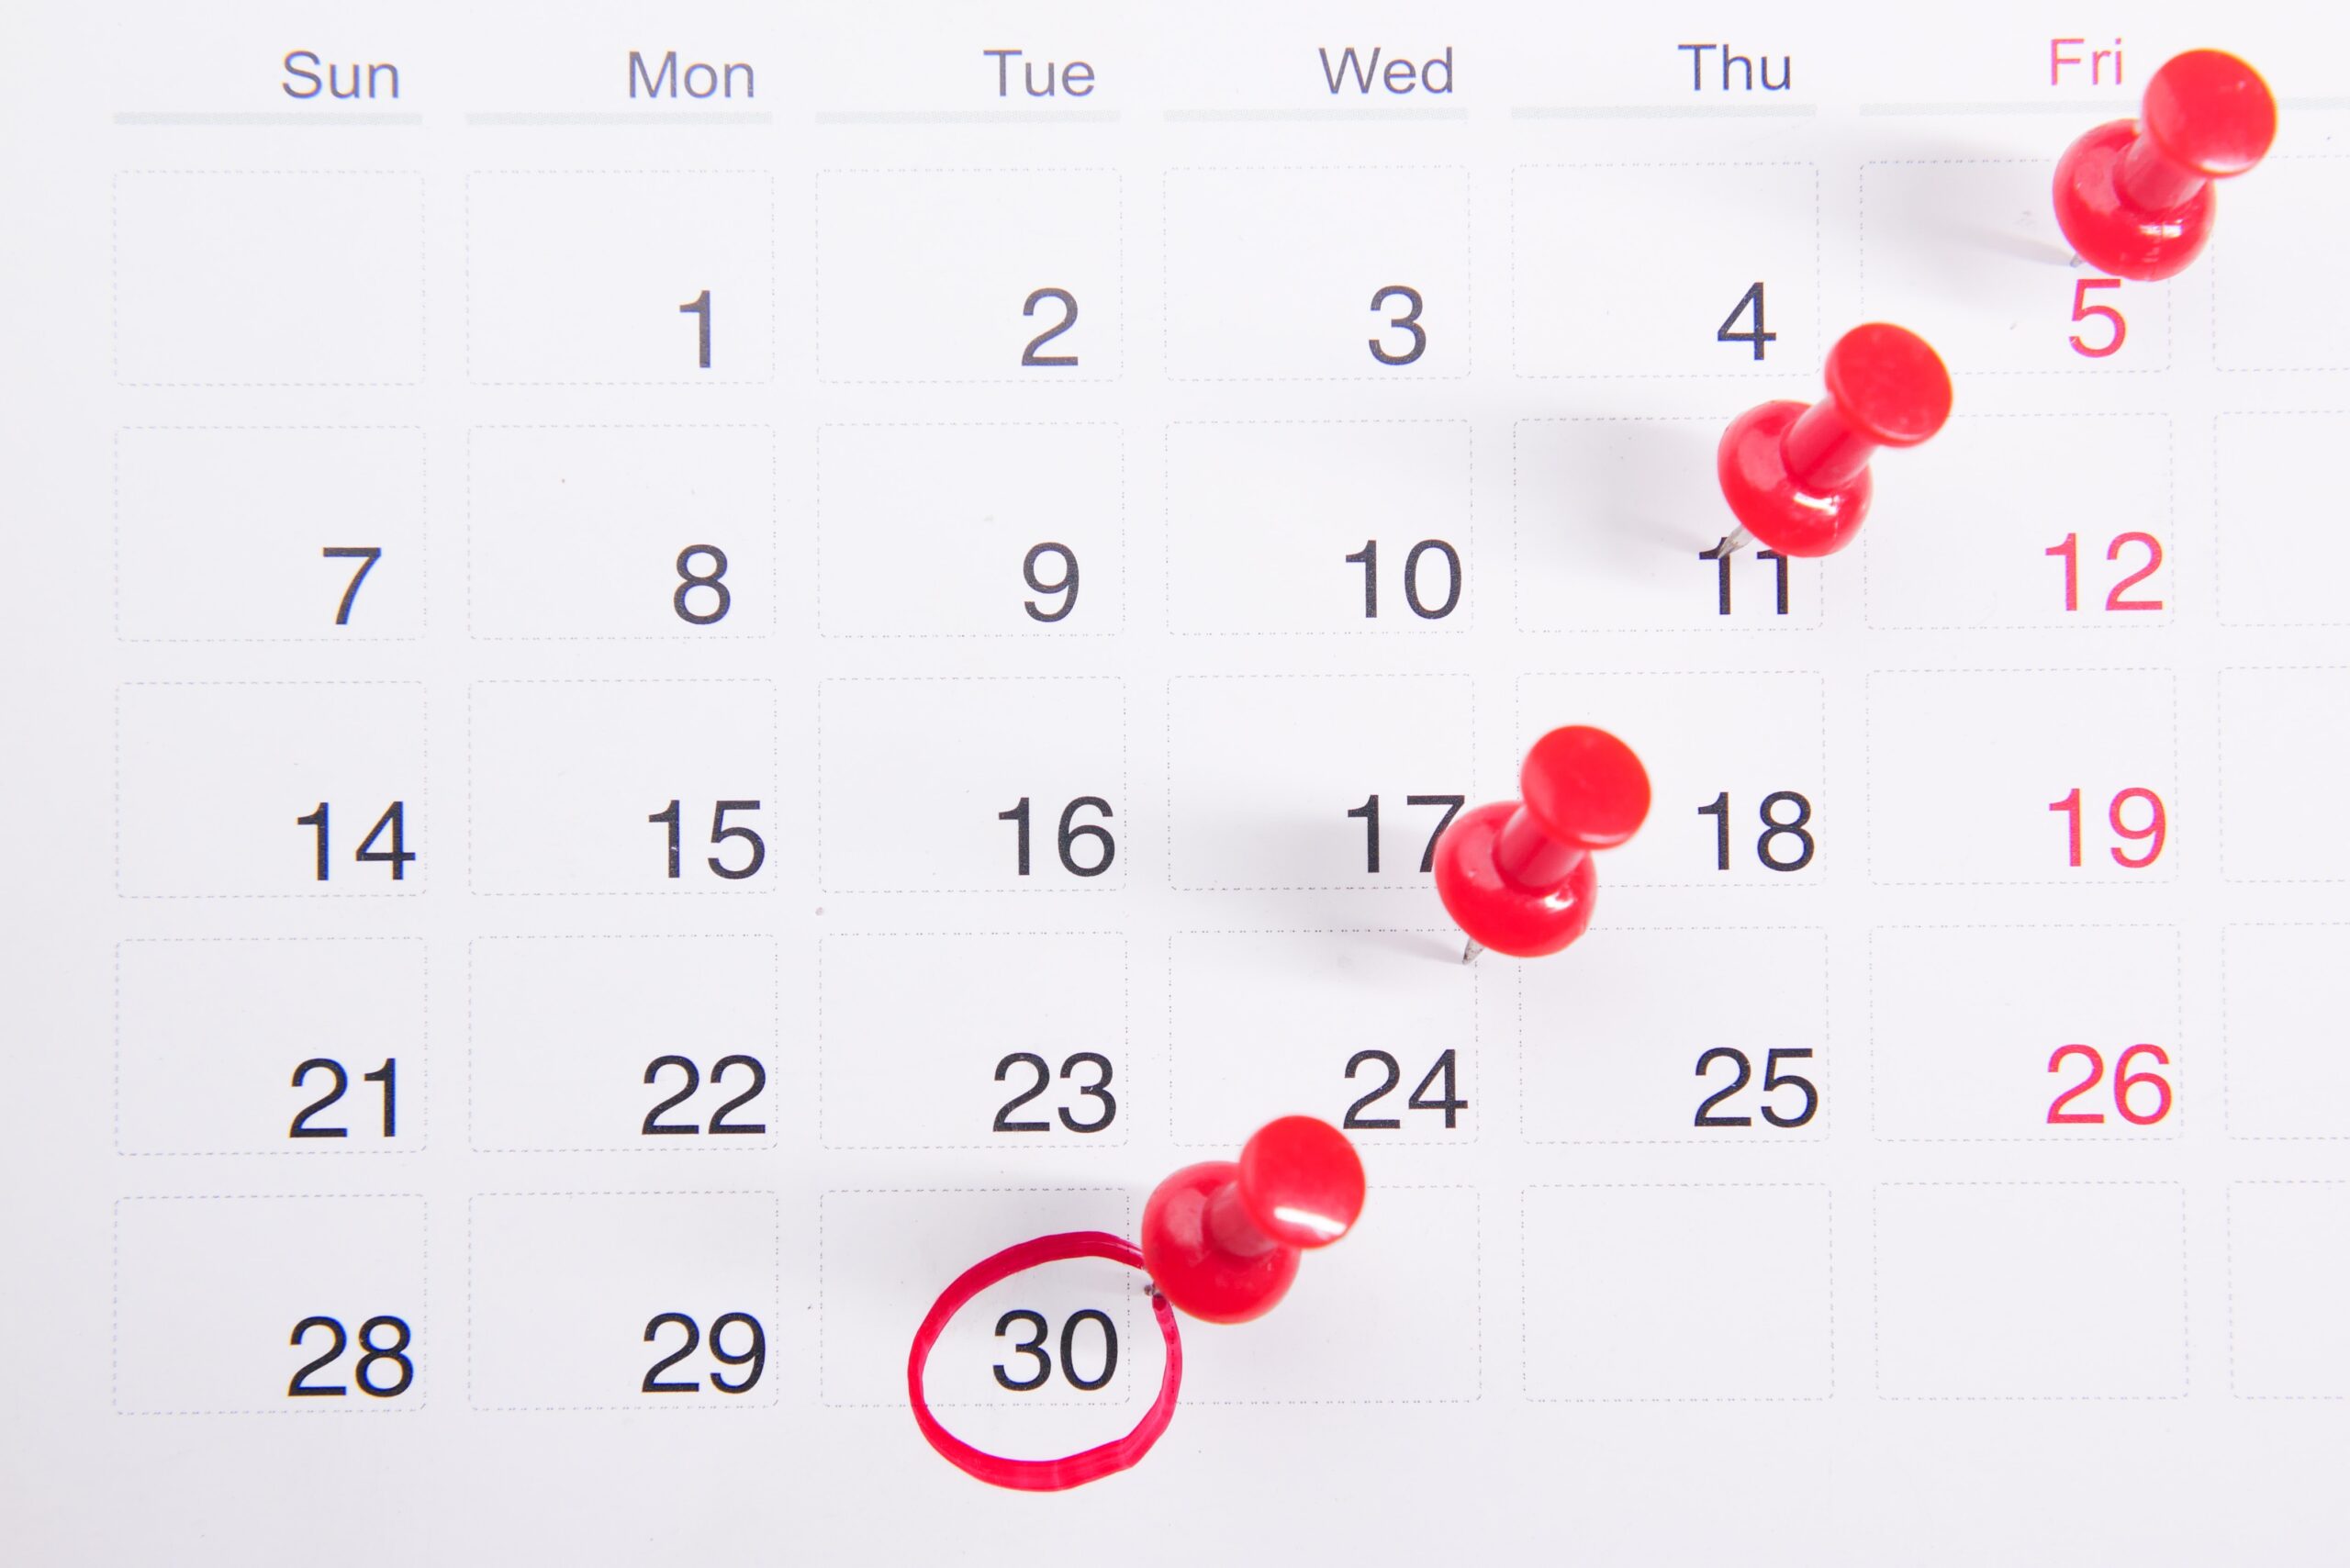 White calendar with red push pins on dates and the end of the month is circled in red ink.